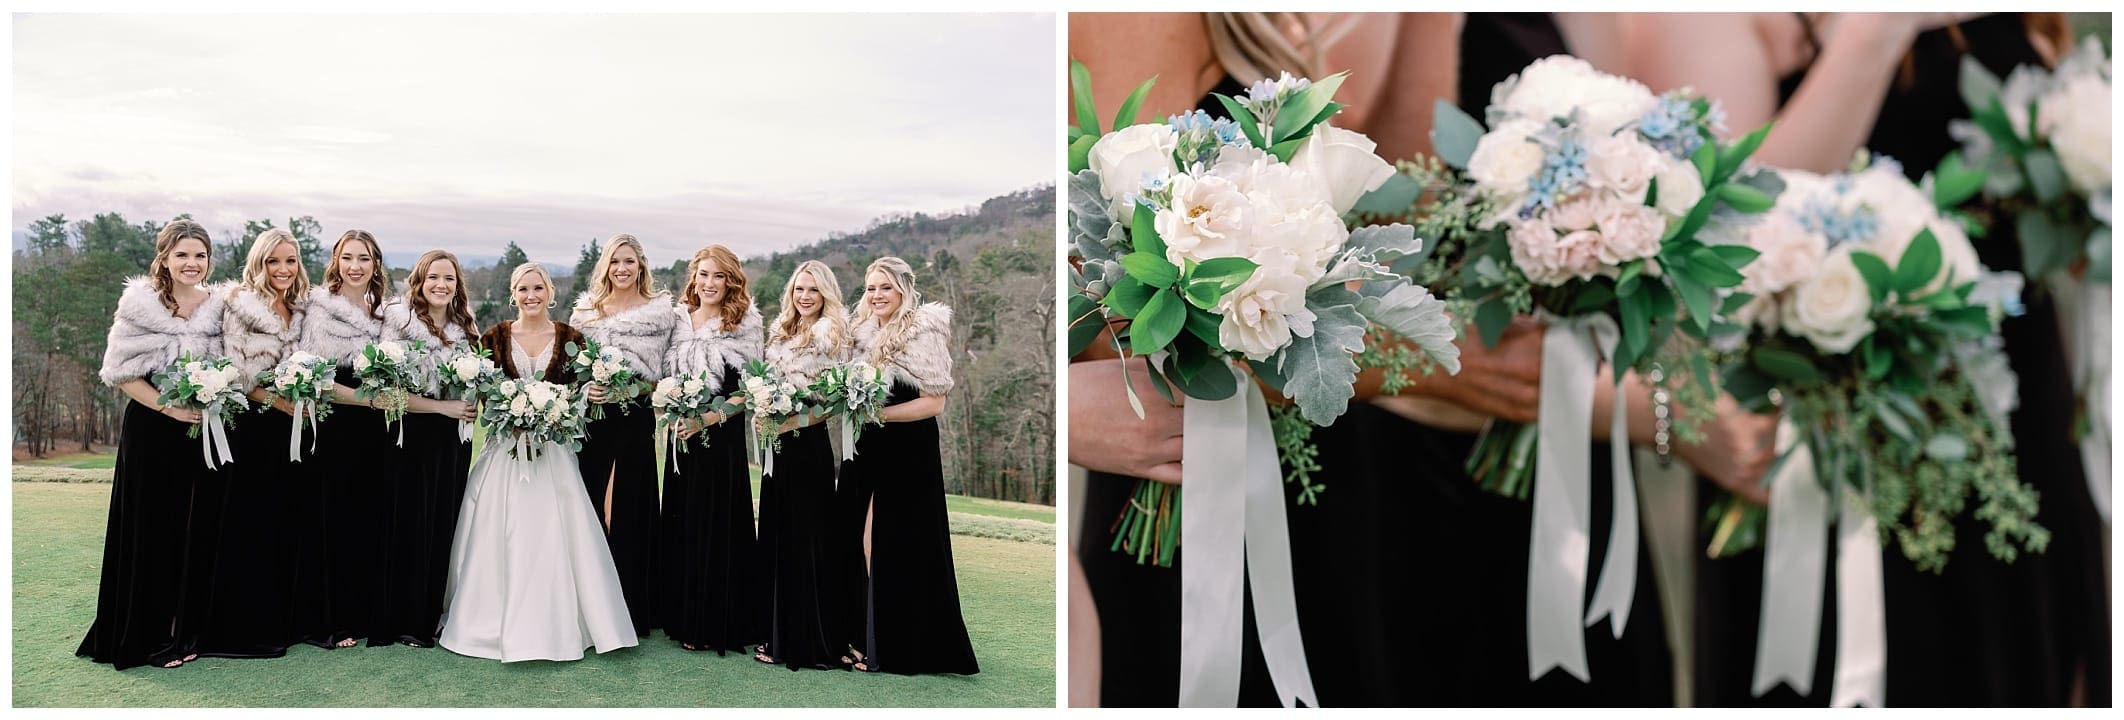 bride poses with bridesmaids in black dresses wearing furs our Asheville winter wedding